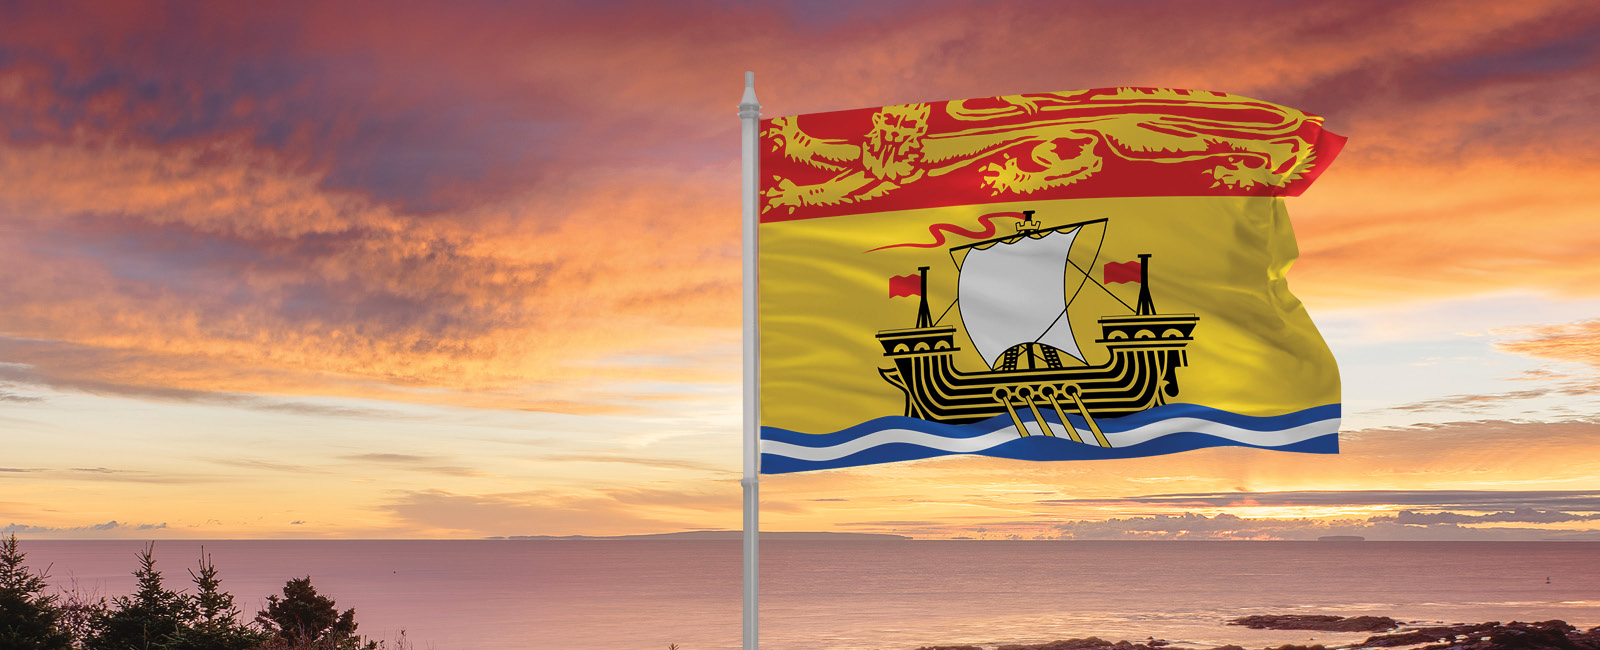 New Brunswick flag with ocean in background